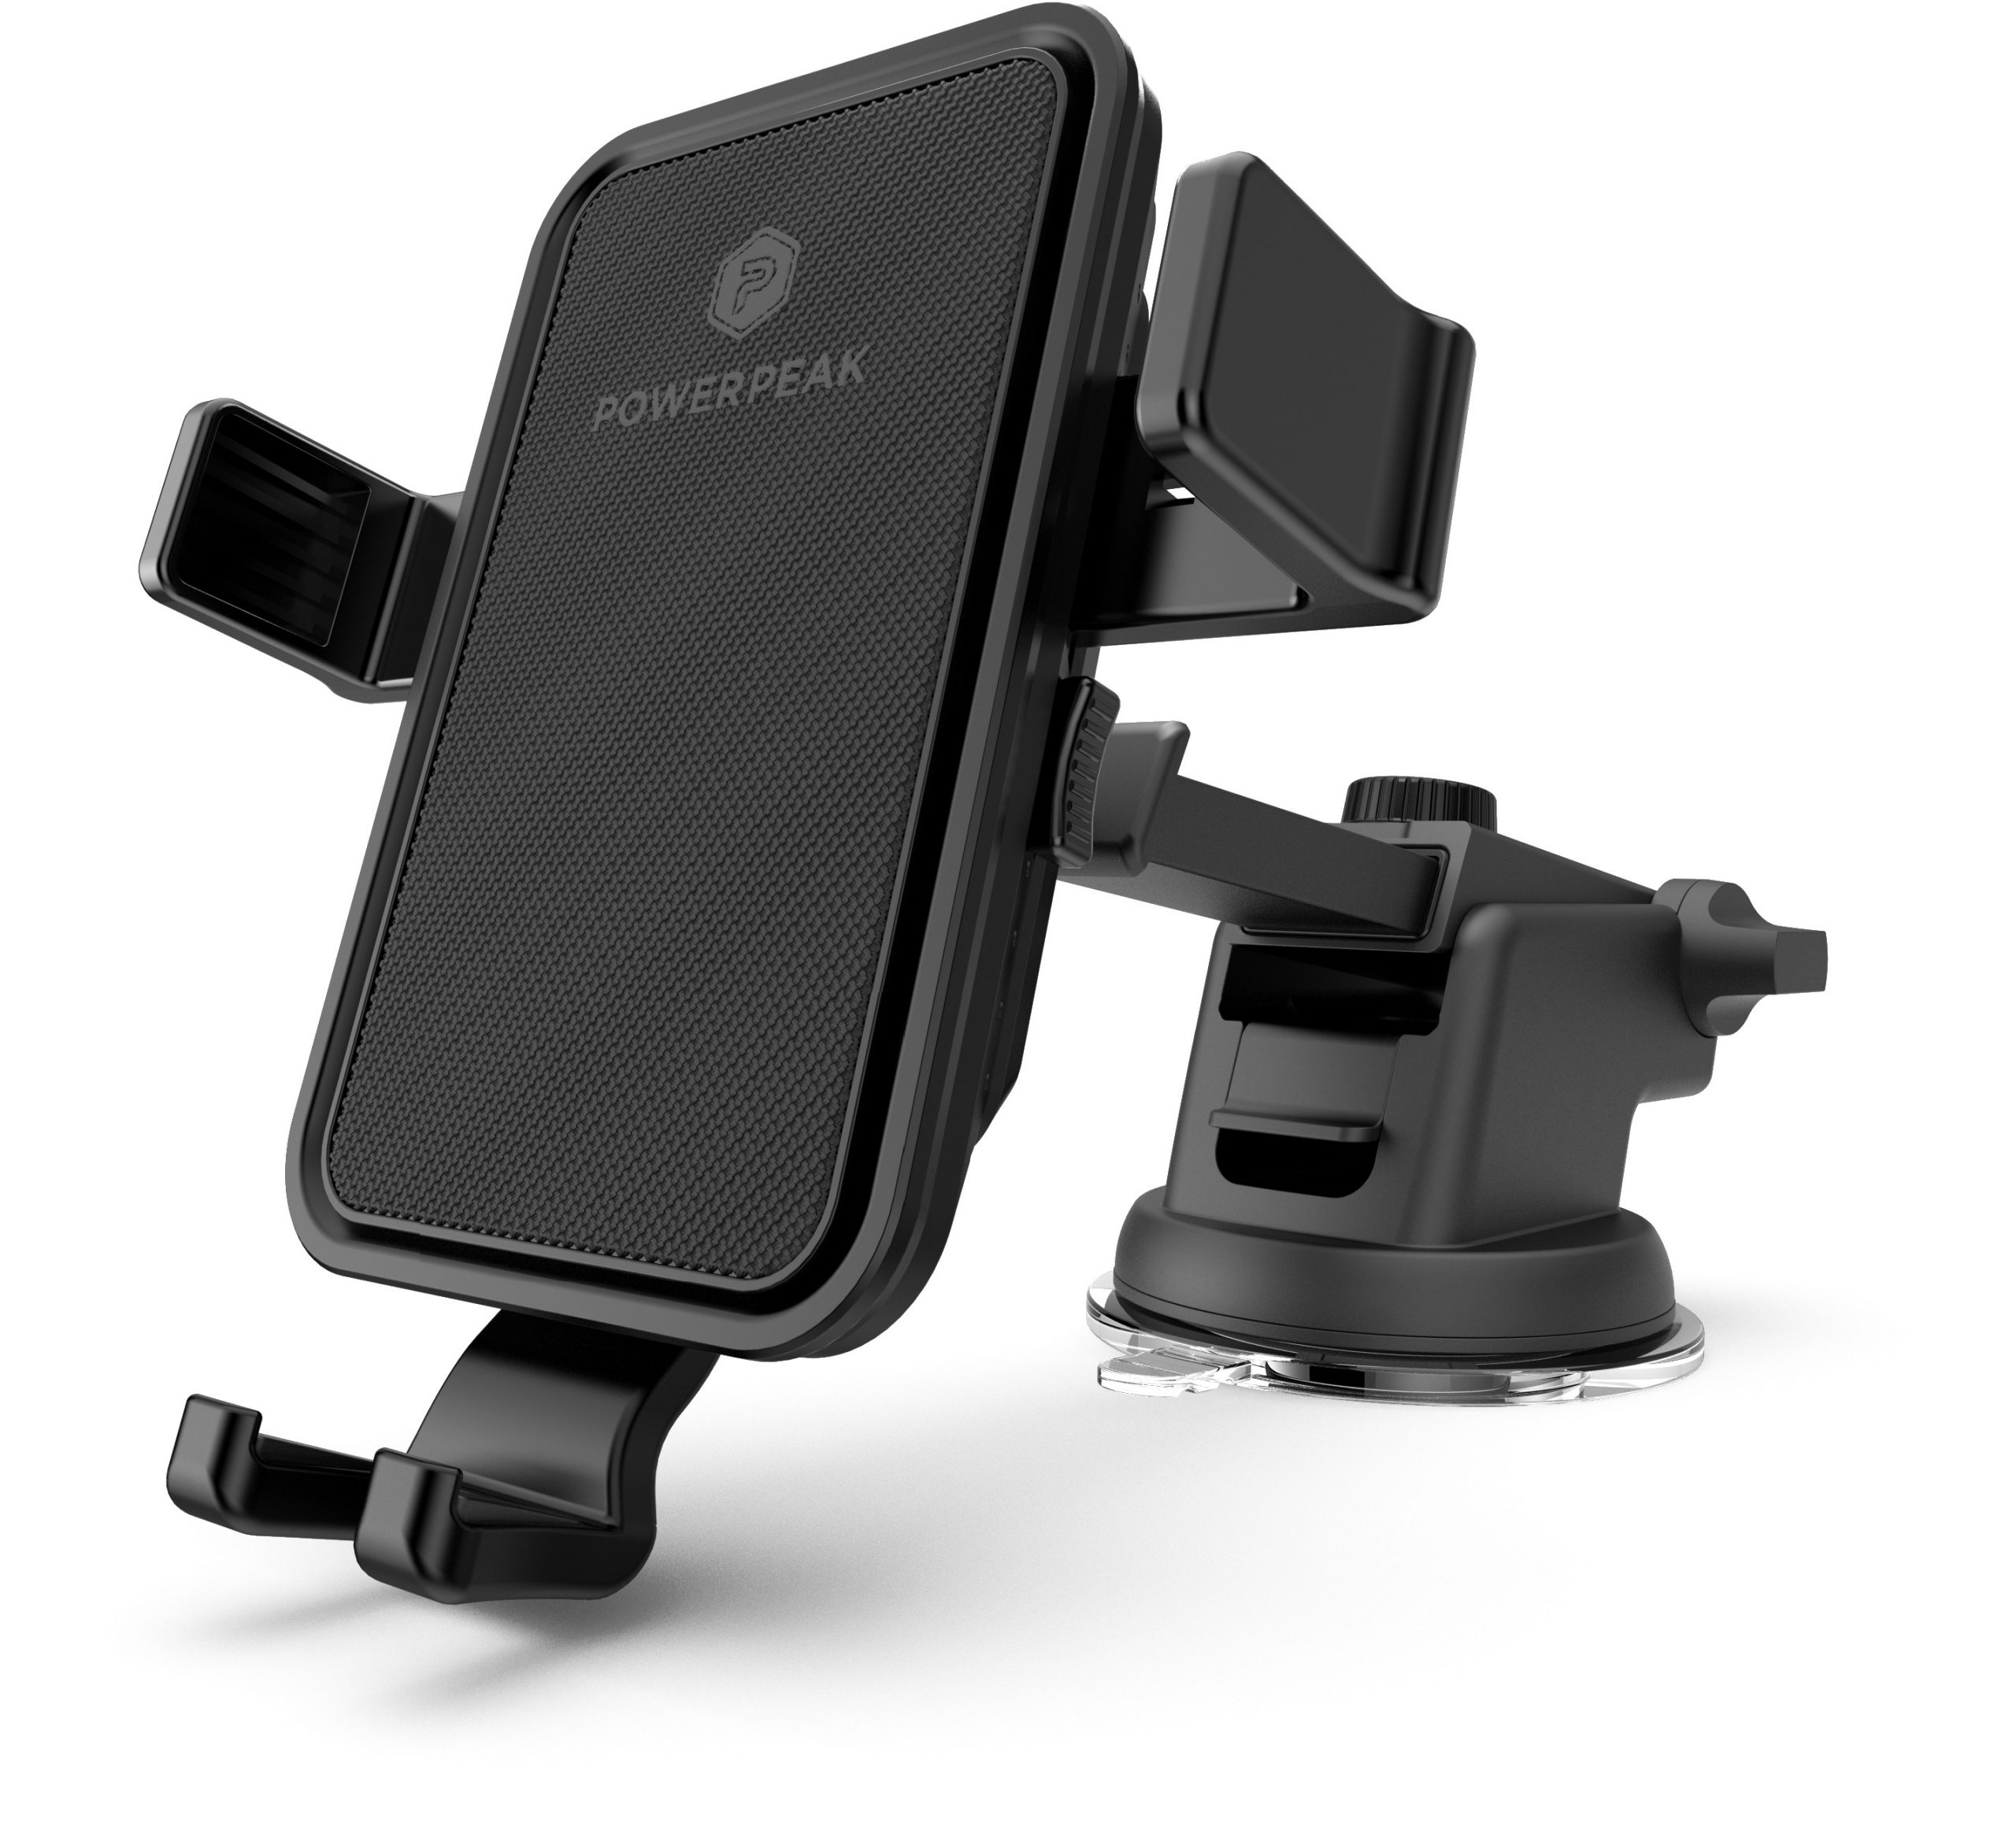 Black Windshield/ dash and Vent Car Mount for mobile devices with telescopic arm